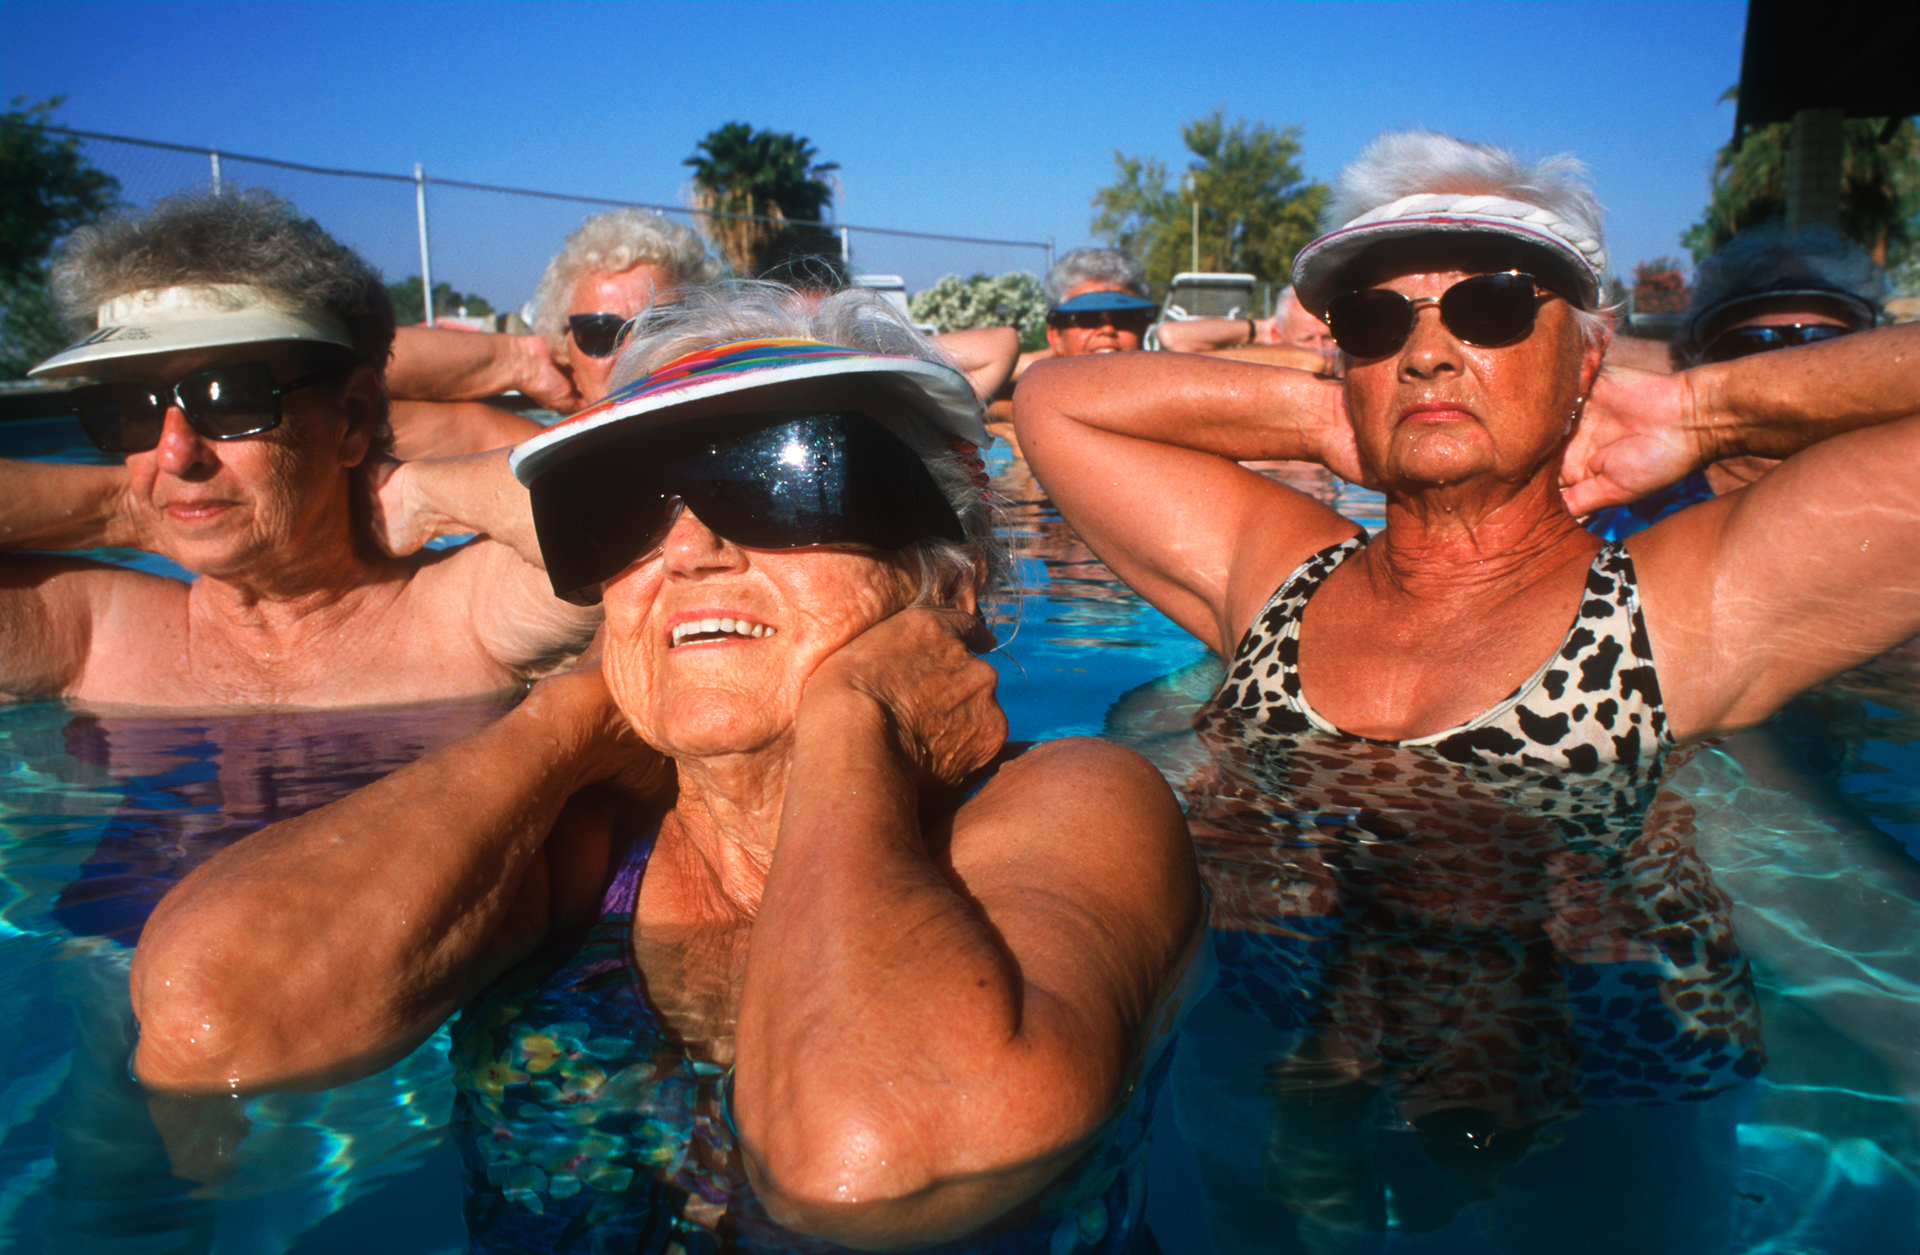  Salton City's low costs and hot climes attract thousands of retirees, or “snowbirds” like these women, enjoying morning pool exercises at the Fountain Of Youth Spa.  Niland  